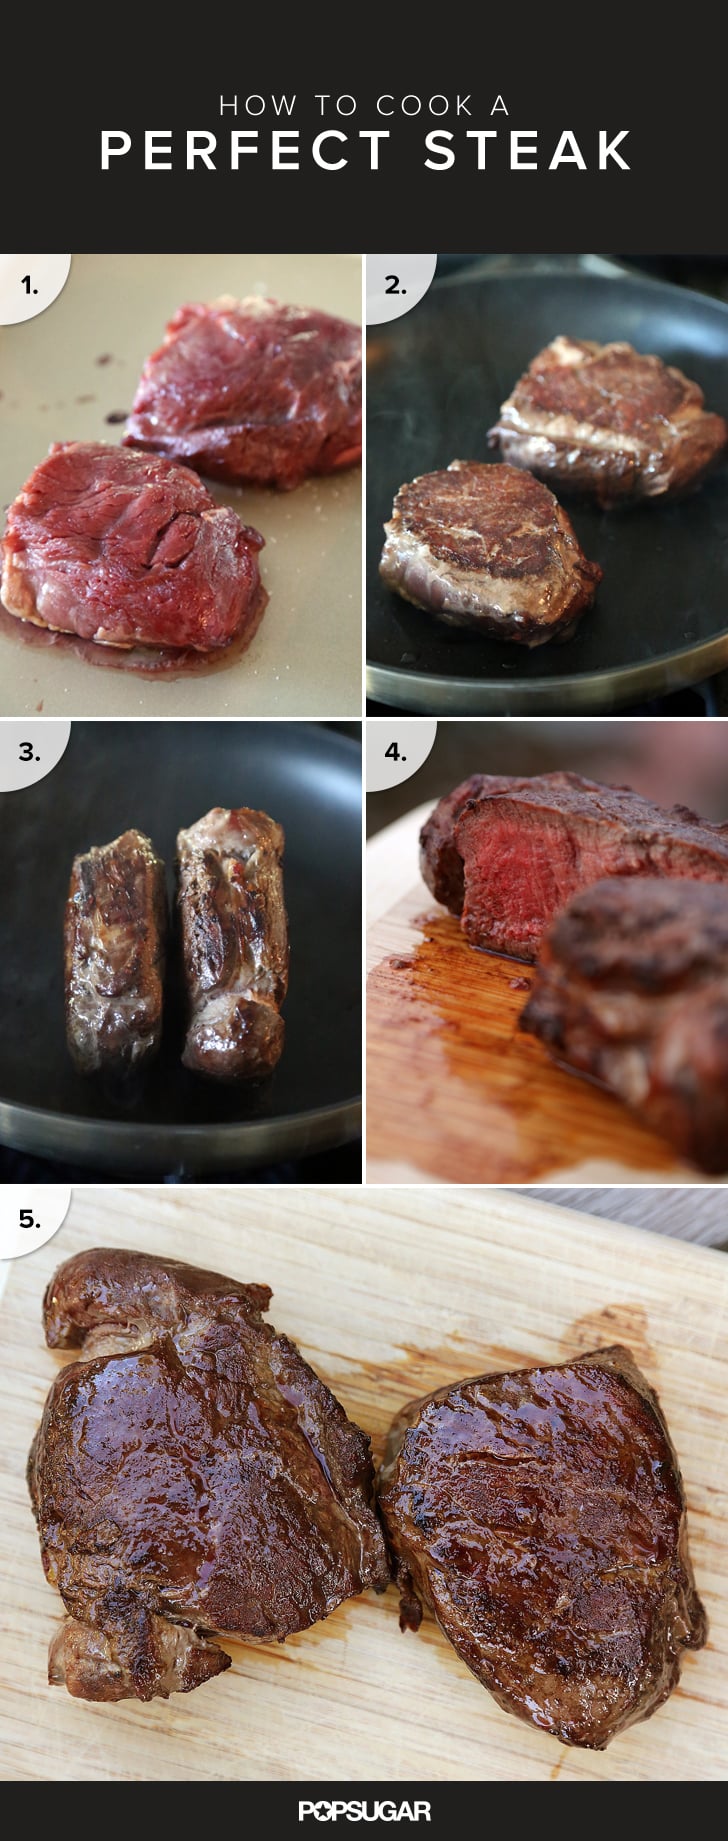 How to Cook a Perfect Steak | POPSUGAR Food